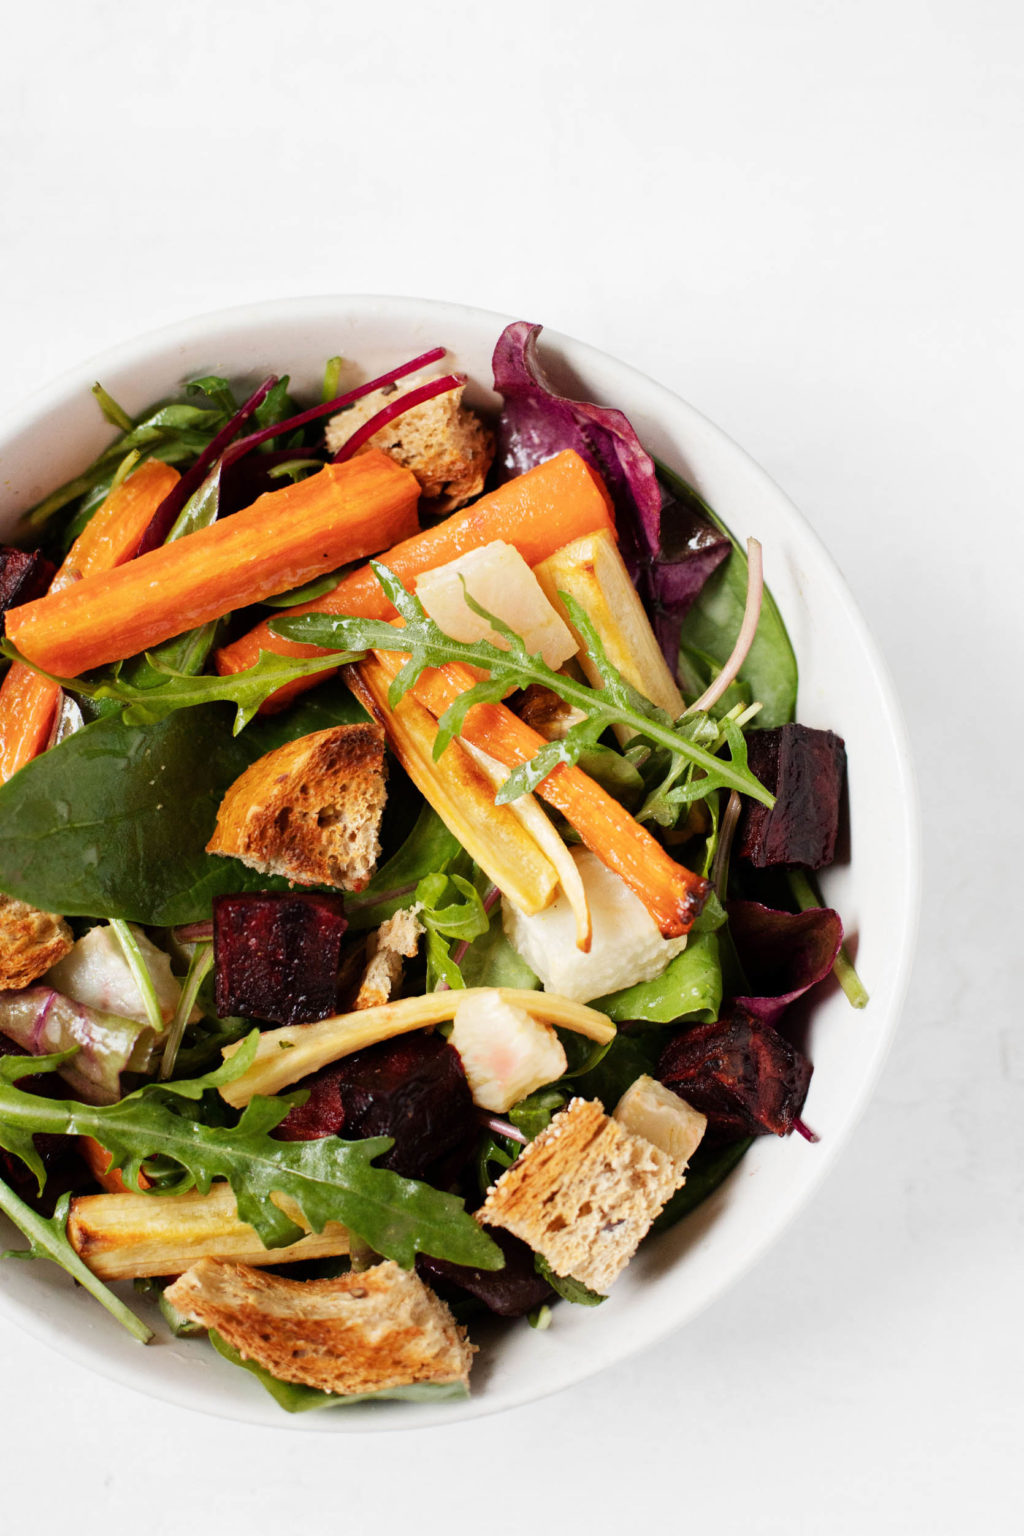 A round bowl containing the colorful ingredients of a wintertime salad, including greens, carrots, parsnips, and beets.